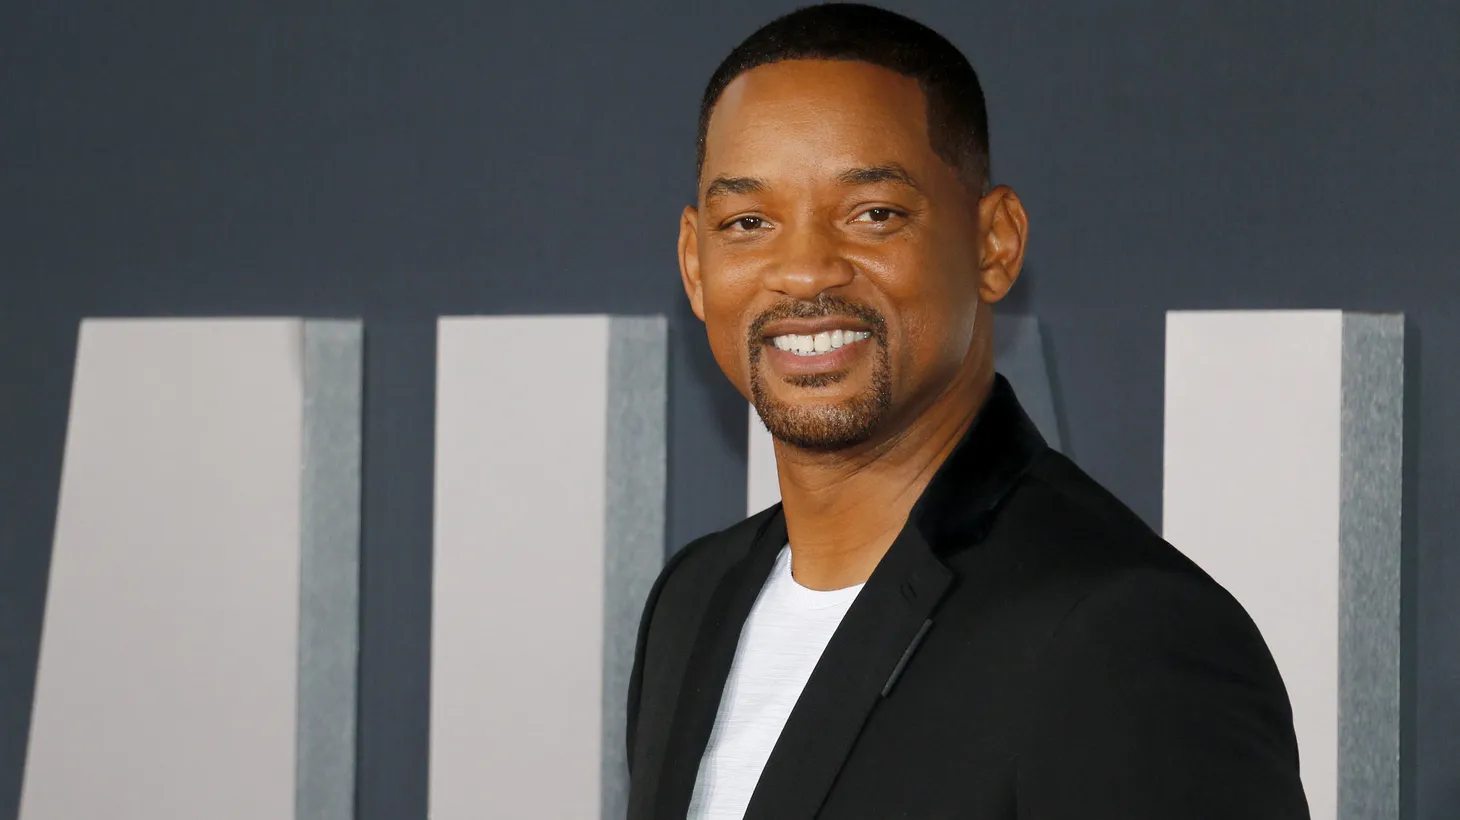 The Academy Board of Governors will meet sooner than expected to address the Will Smith slap incident at the 2022 Oscars ceremony.